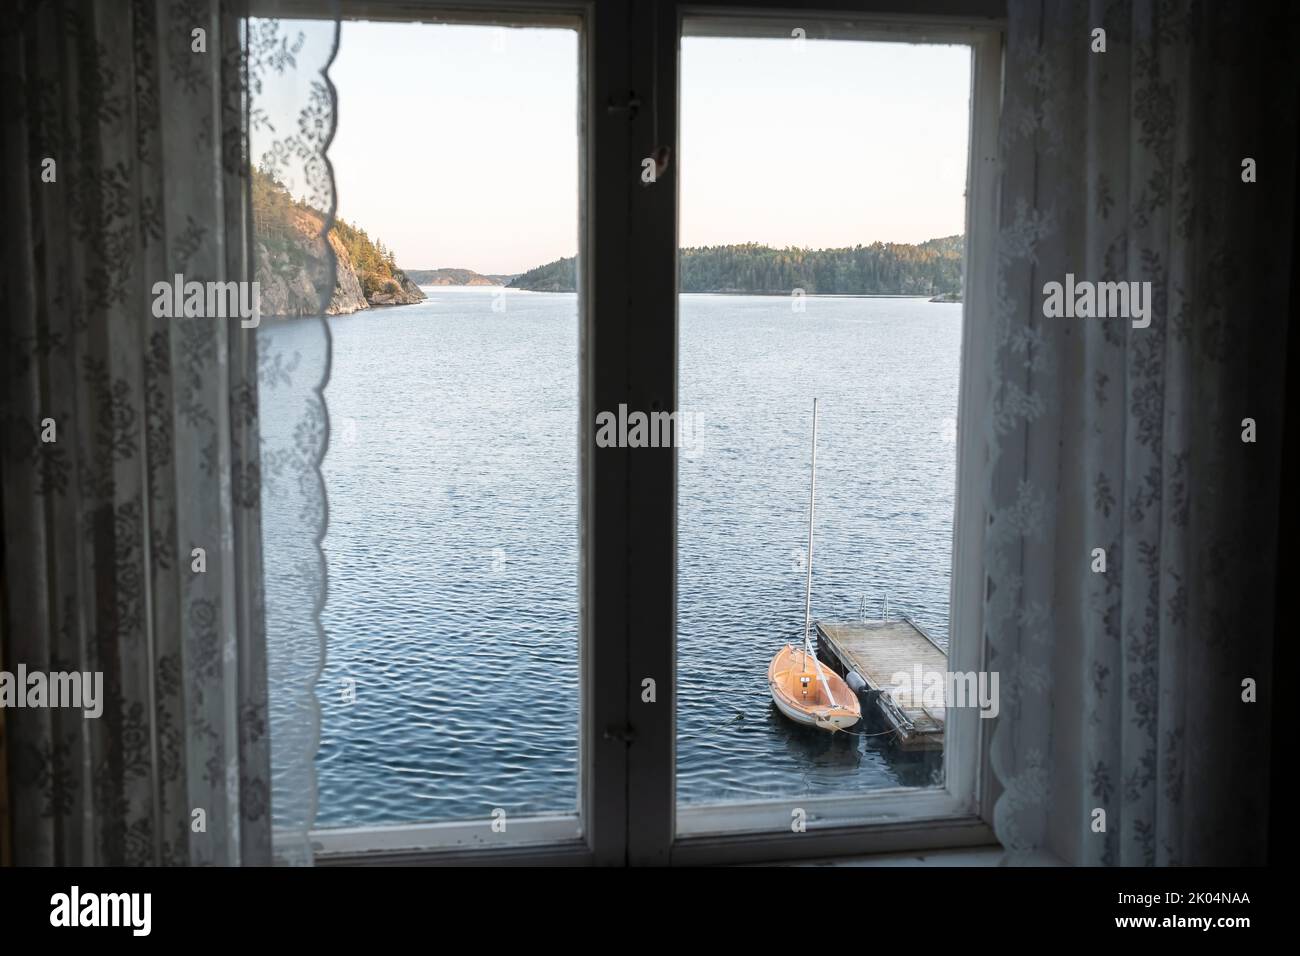 Old closed window across with great views of the sea, rocky shore, moored boat and sky at sunset.  Stock Photo